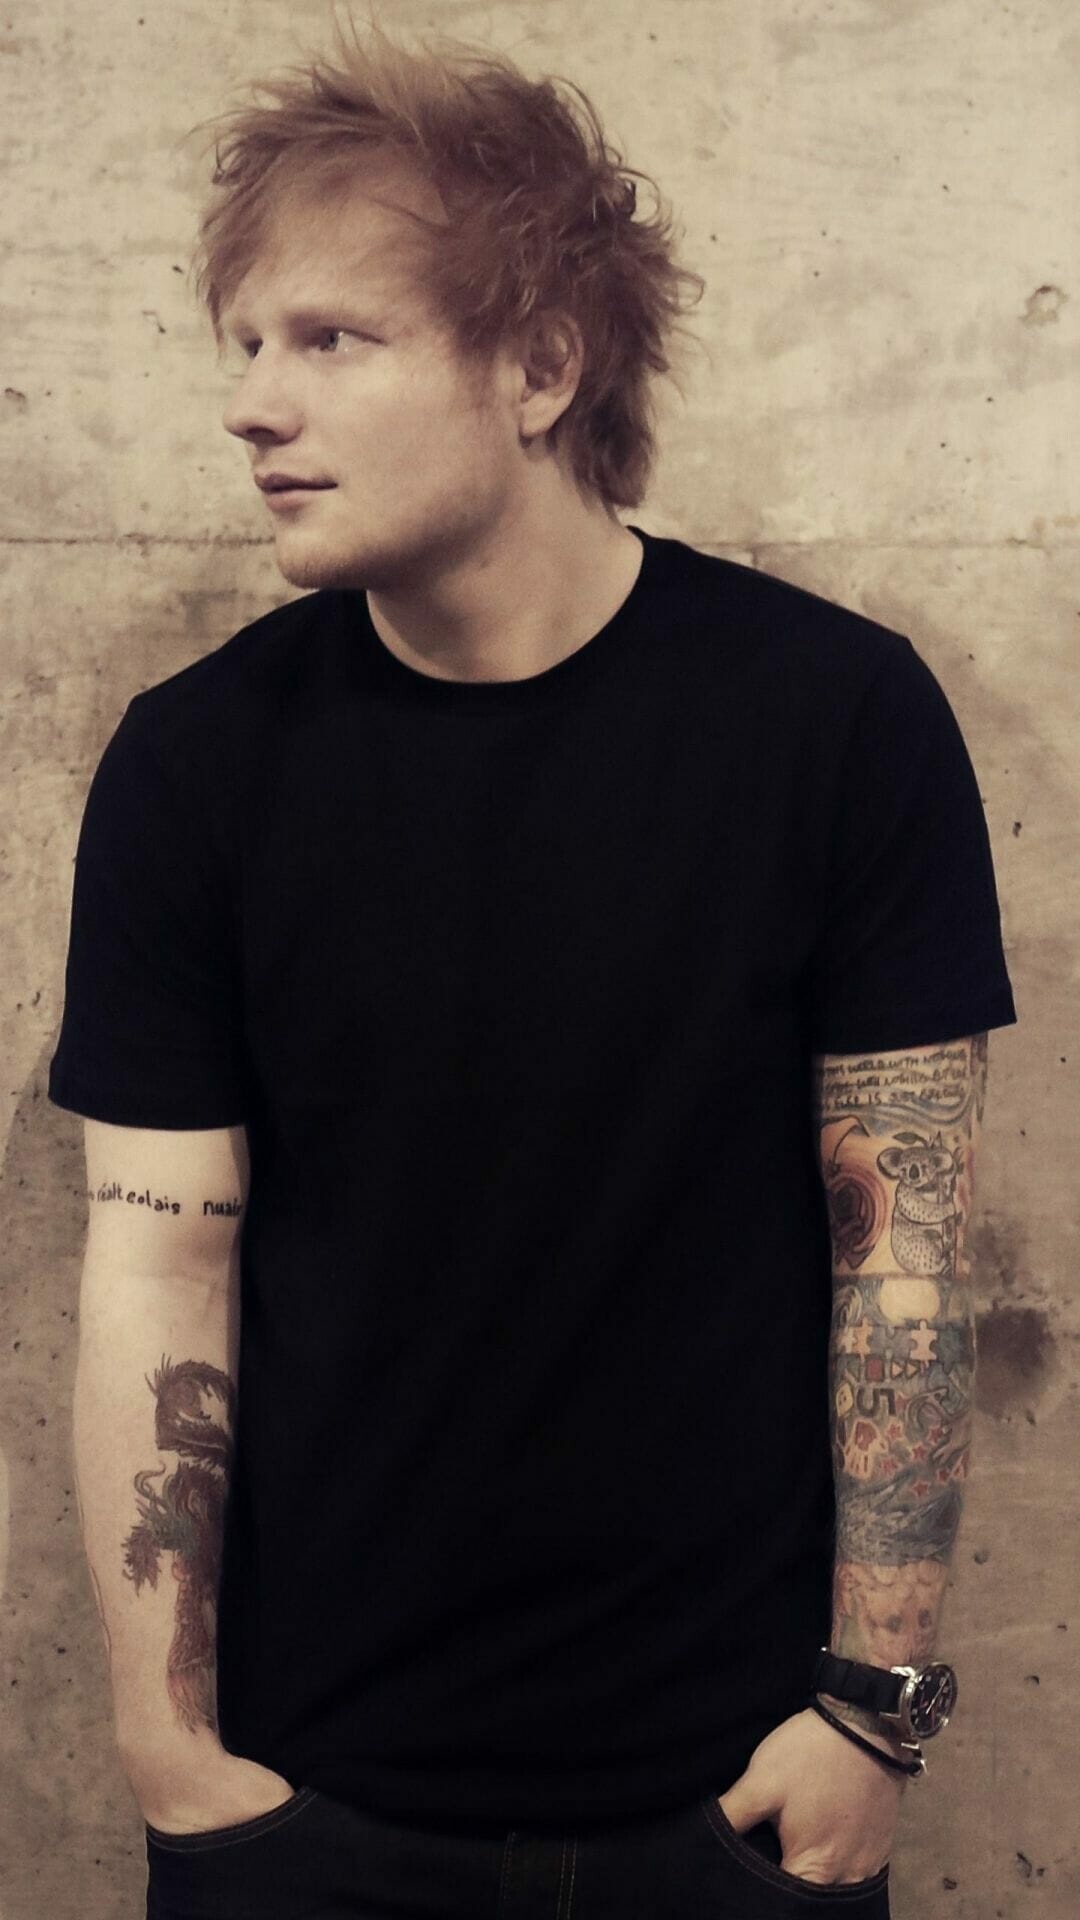 Ed Sheeran: ÷ debuted at number one on the US Billboard 200, An English singer-songwriter. 1080x1920 Full HD Background.